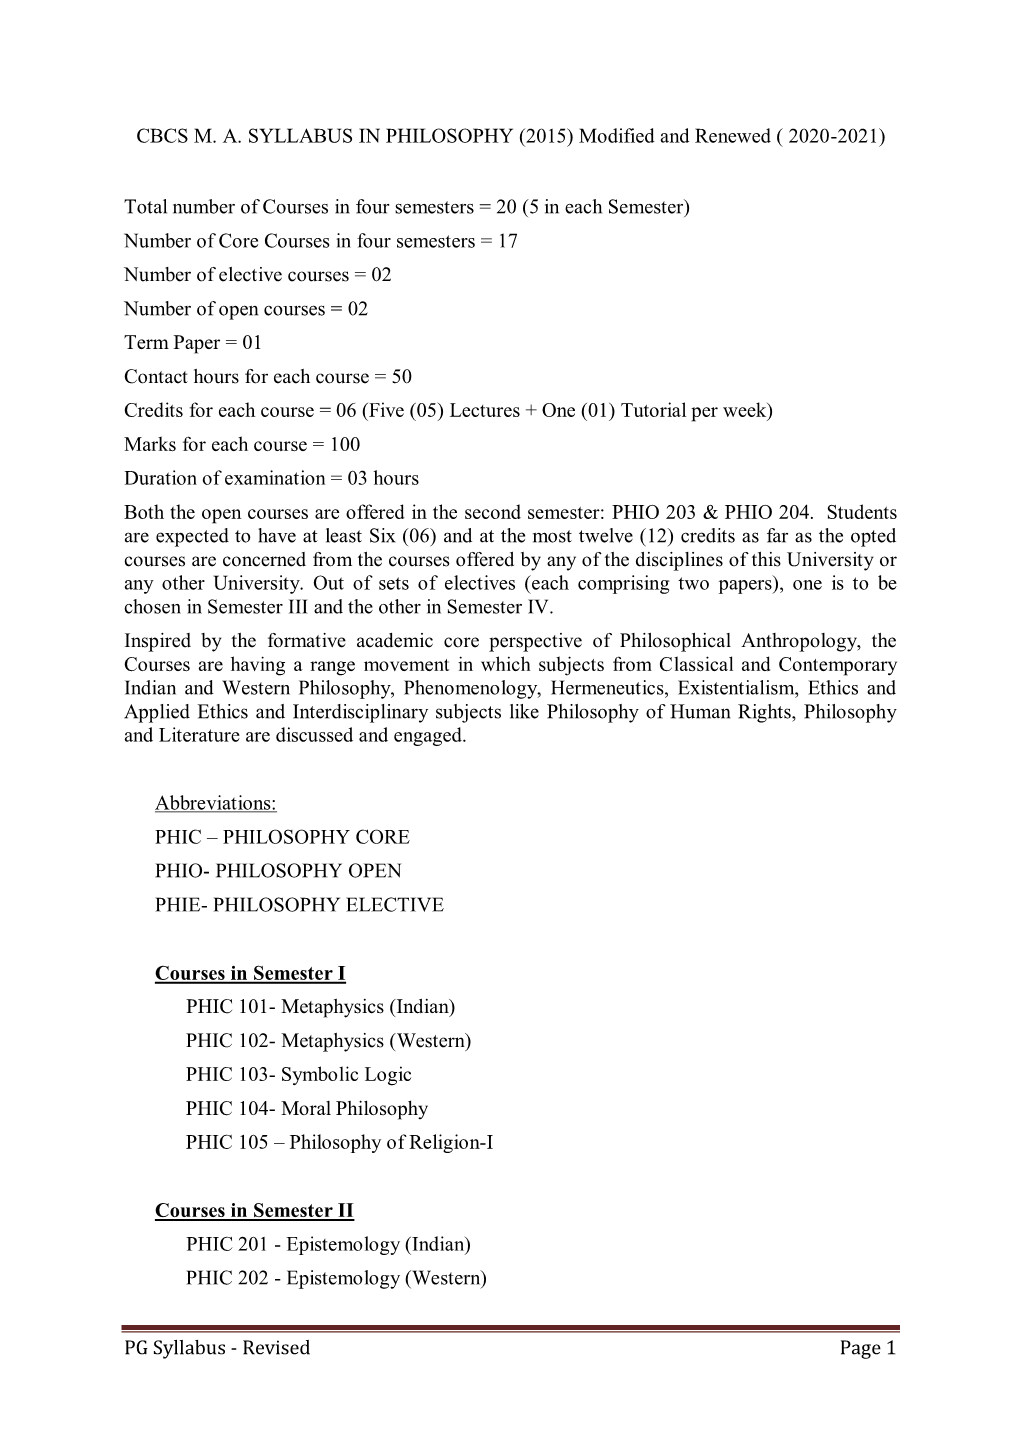 PG Syllabus - Revised Page 1